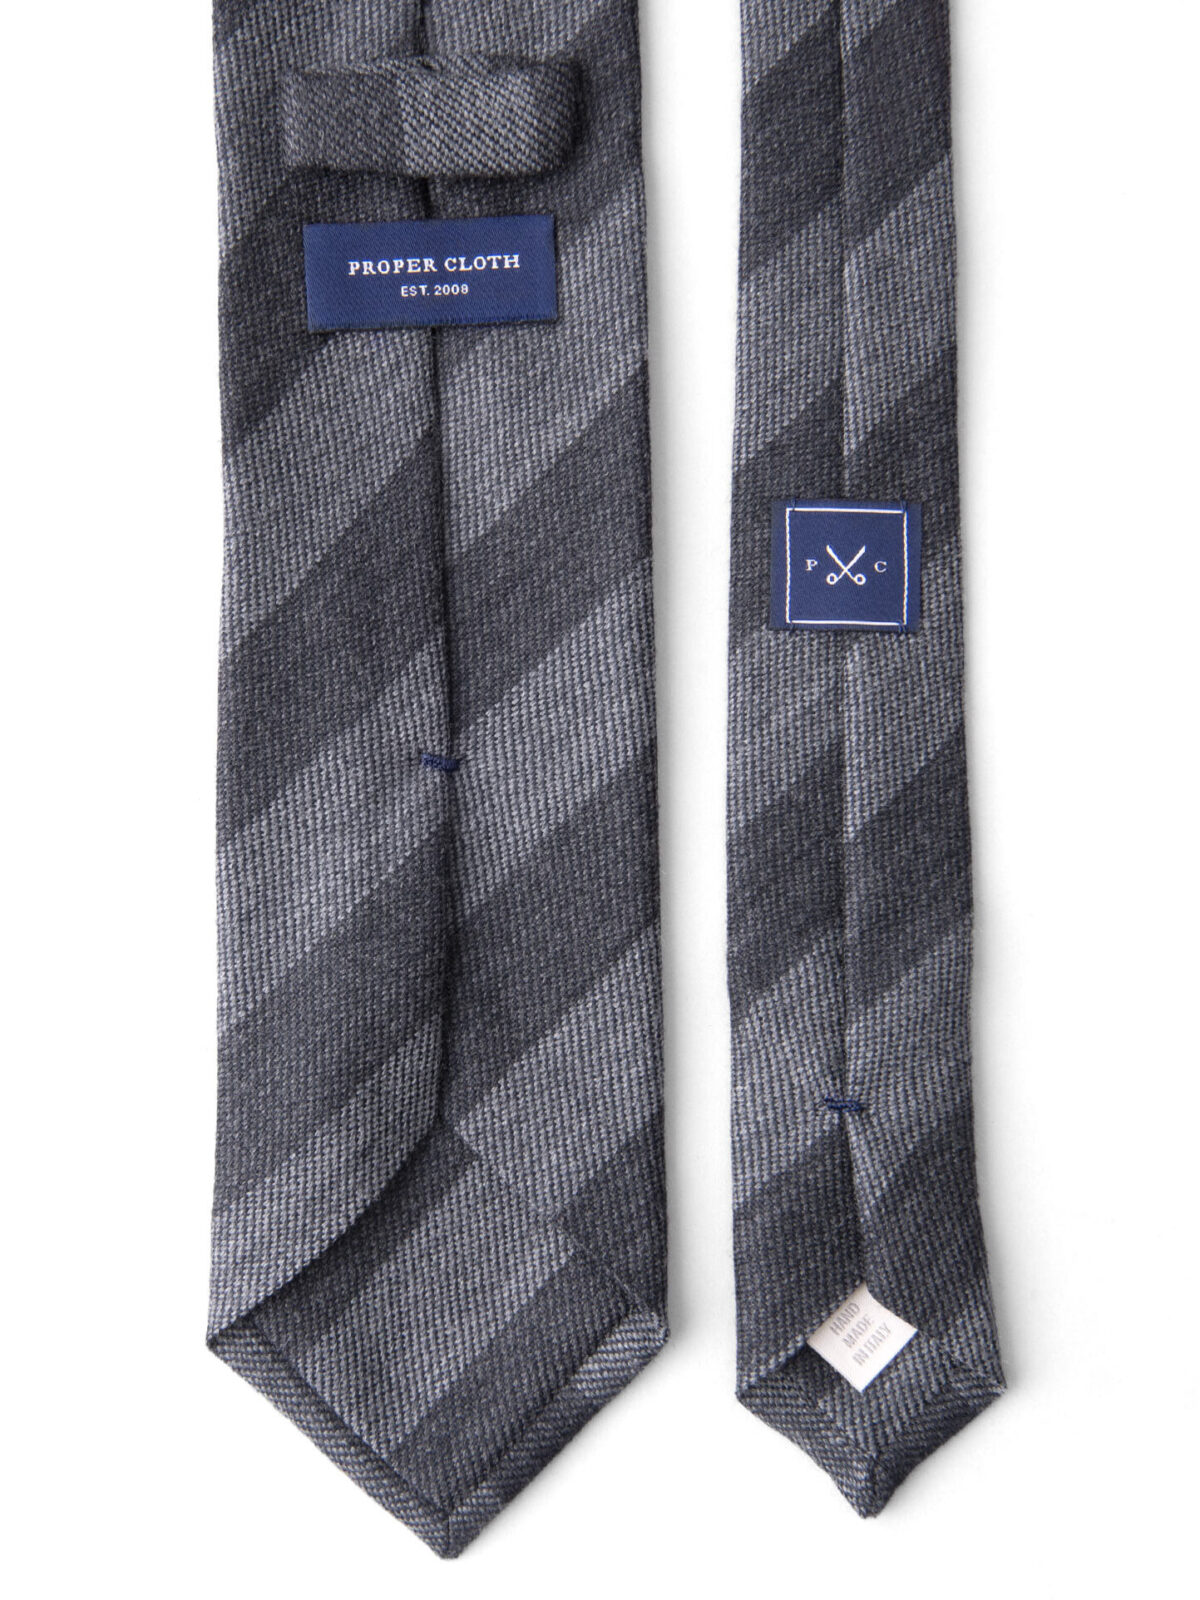 Grey and Charcoal Striped Wool Tie